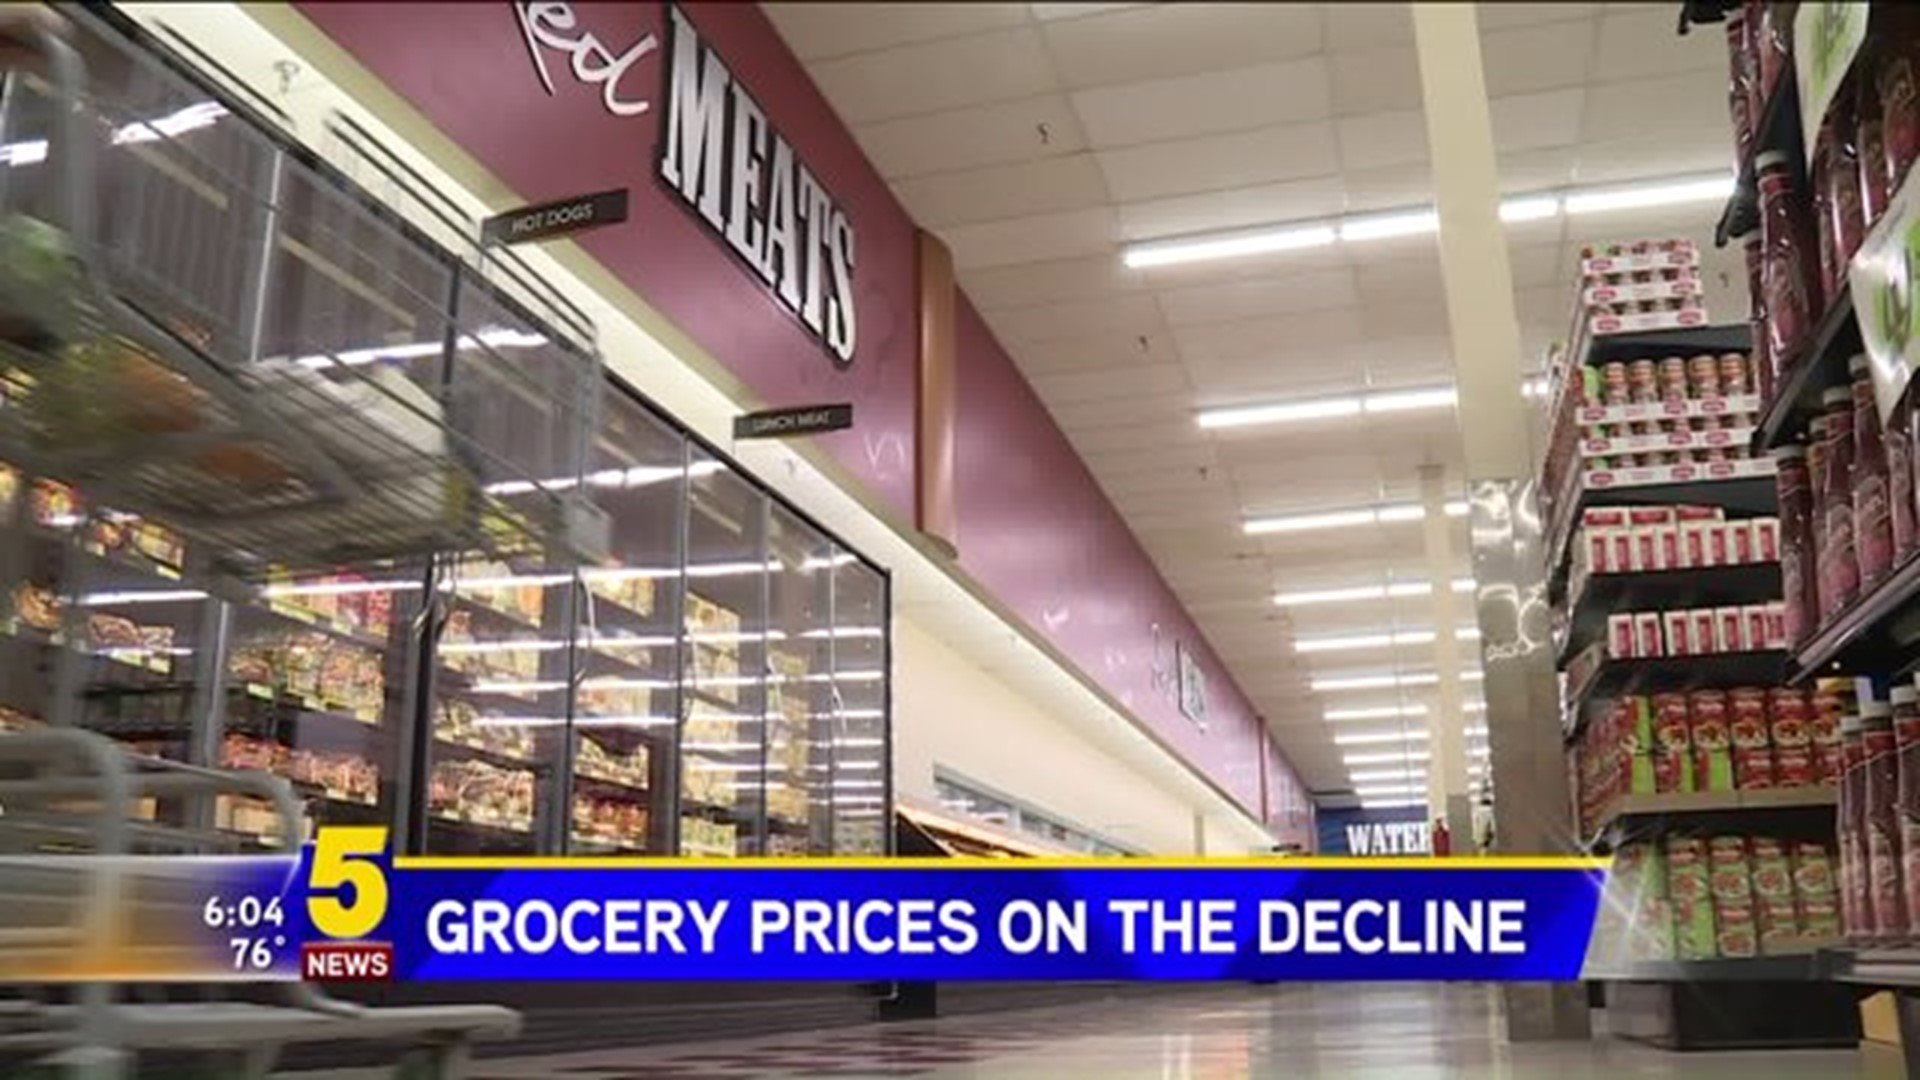 GROCERY PRICES ON THE DECLINE